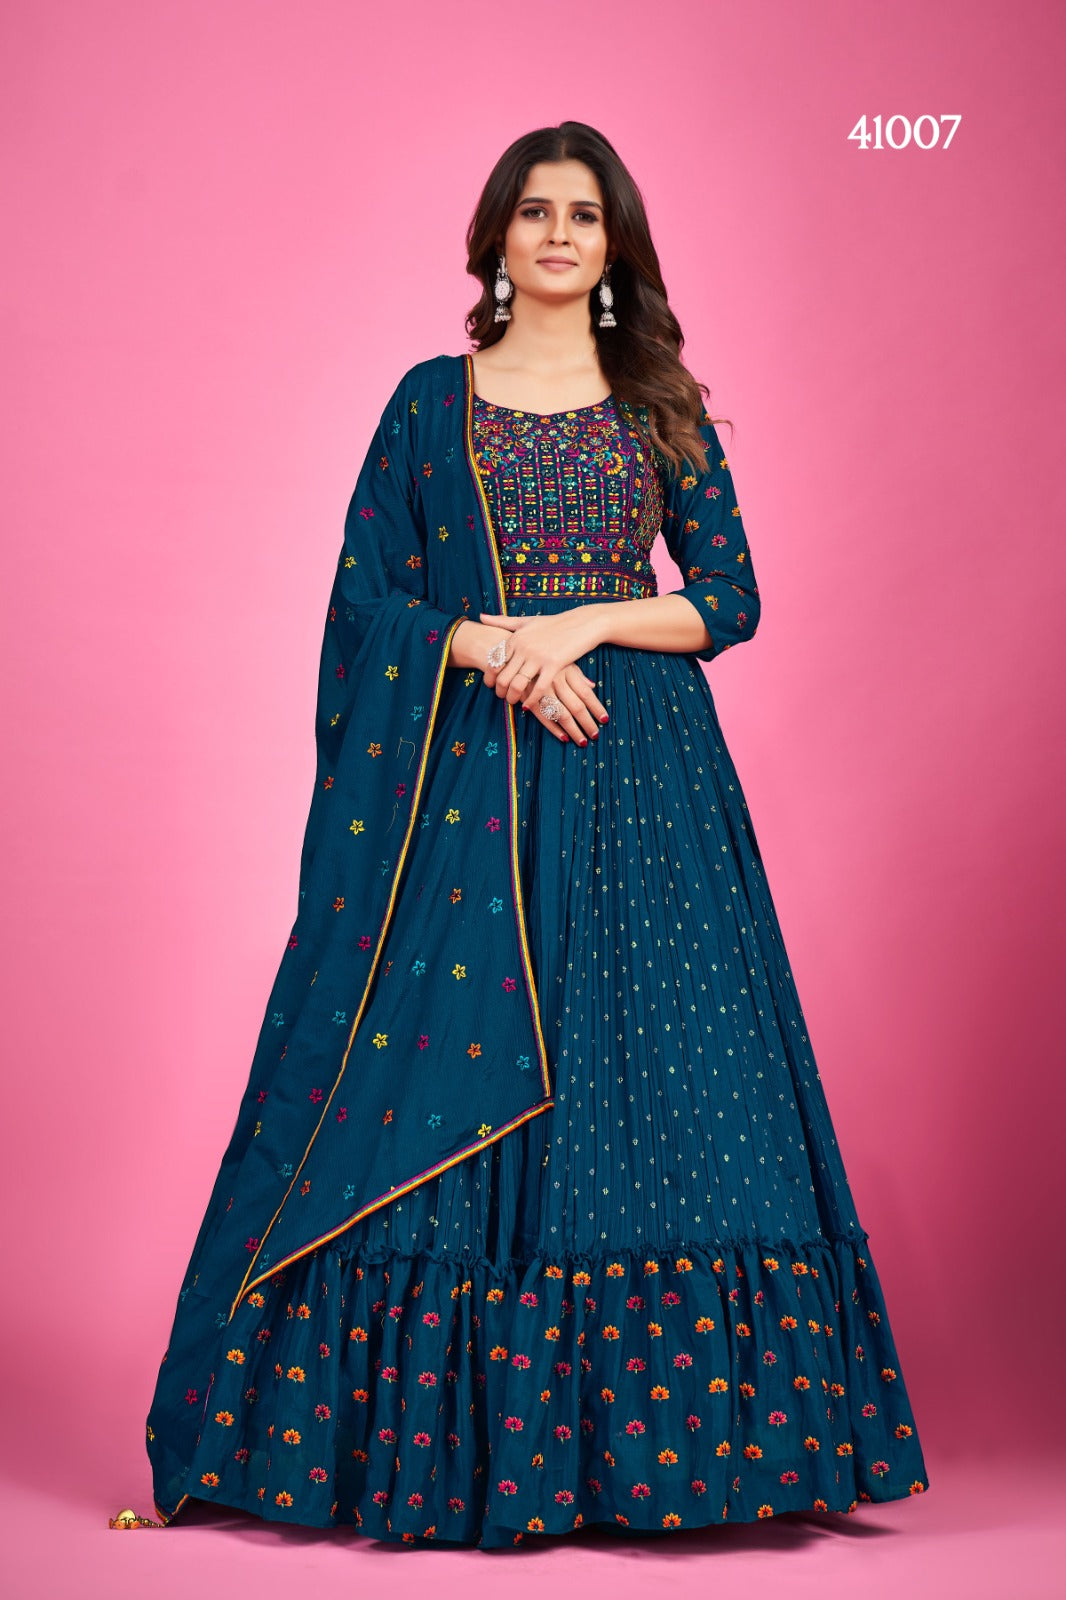 ARYA ZOYA VOL. 1 DESIGNER GOWN Anant Tex Exports Private Limited